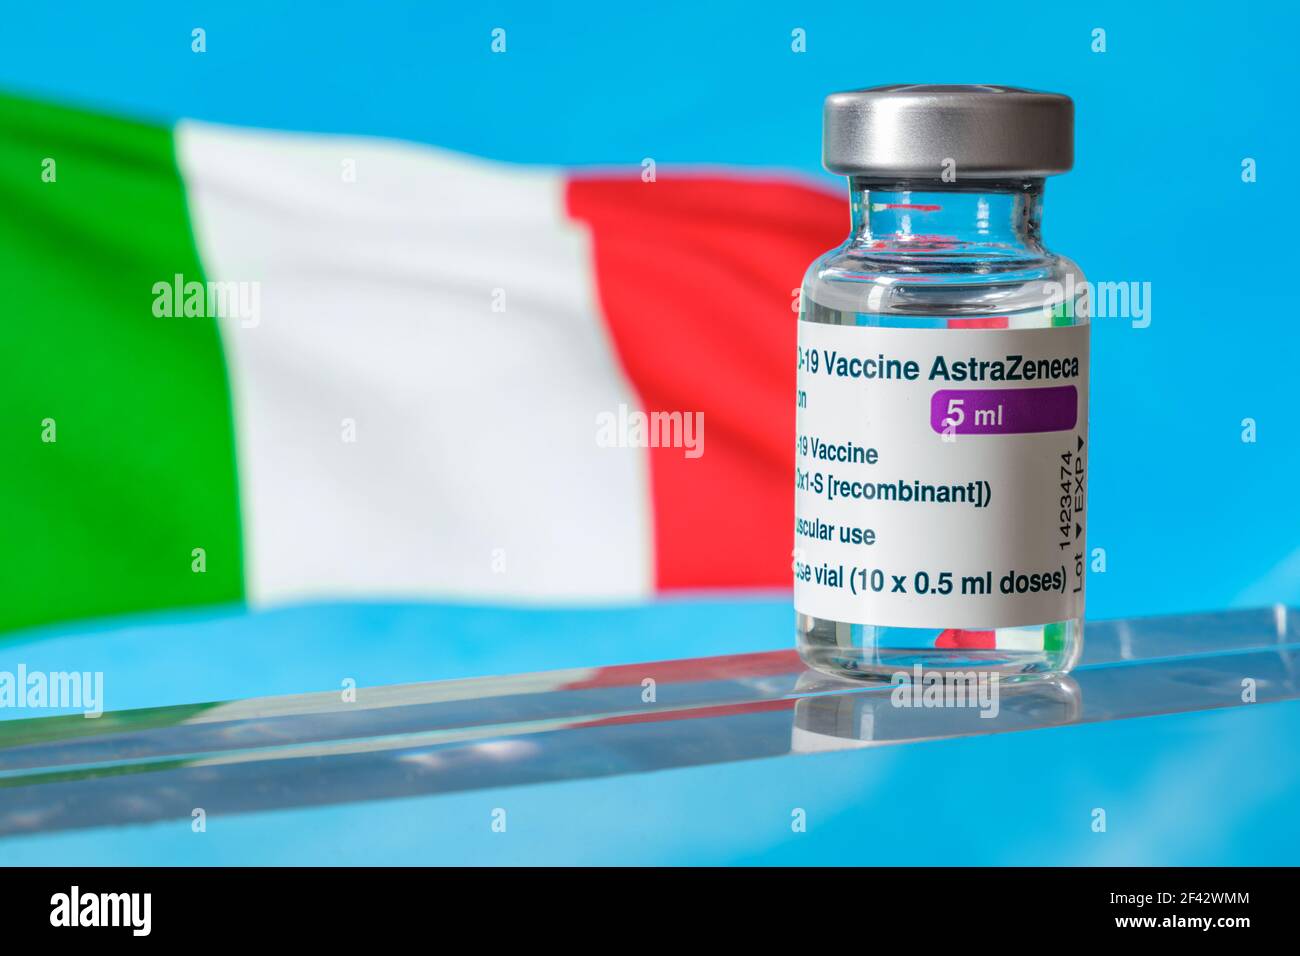 Montreal, CA - 18 March 2021: Vial of Astrazeneca Covid-19 vaccine in front of an Italy flag Stock Photo